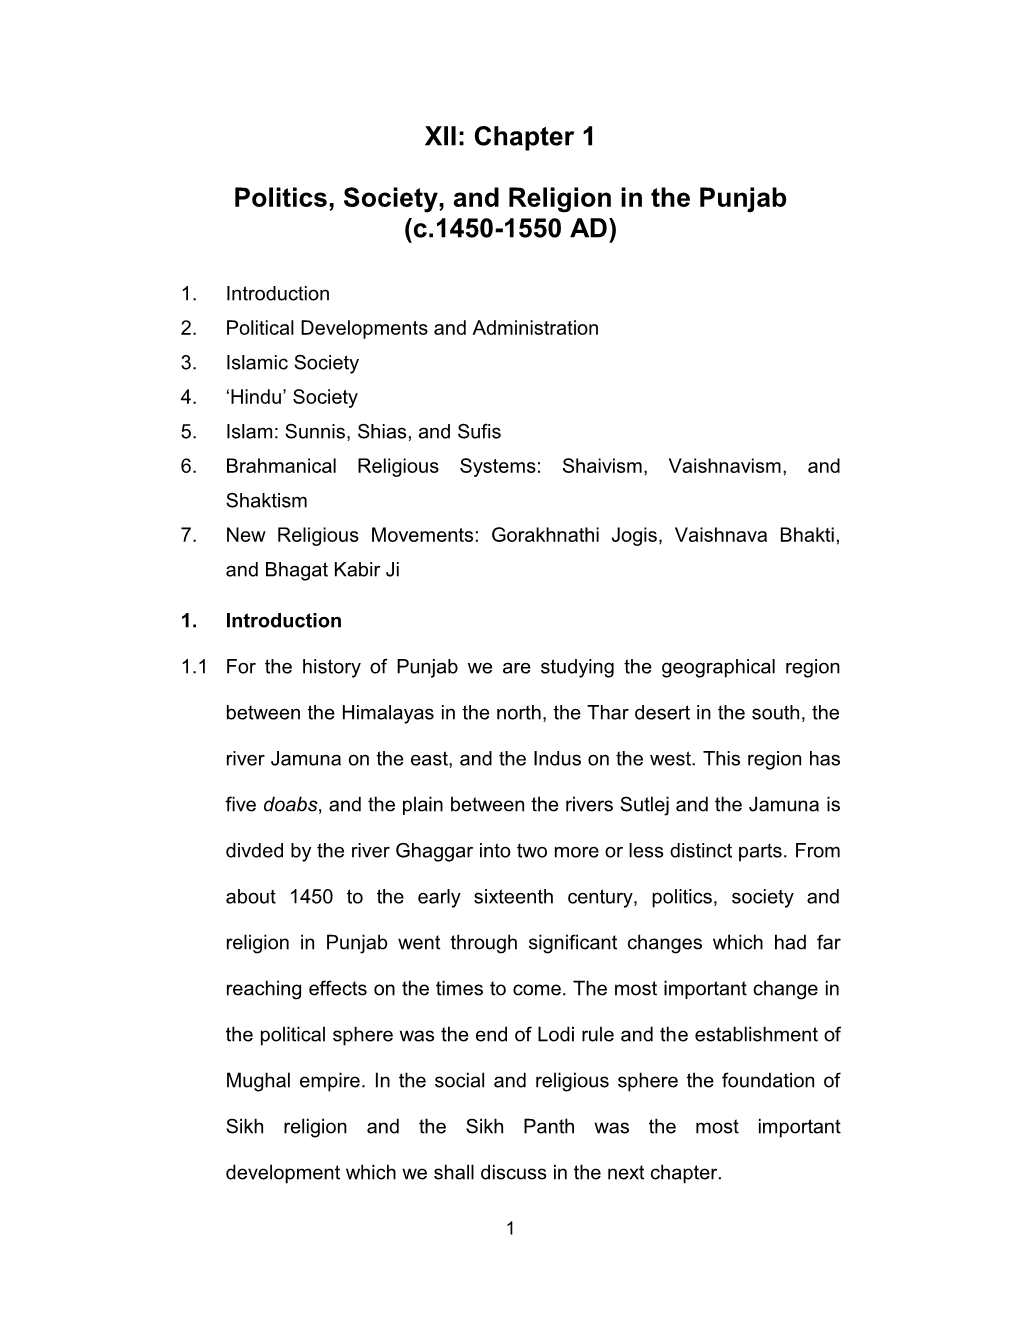 XII: Chapter 1 Politics, Society, and Religion in the Punjab